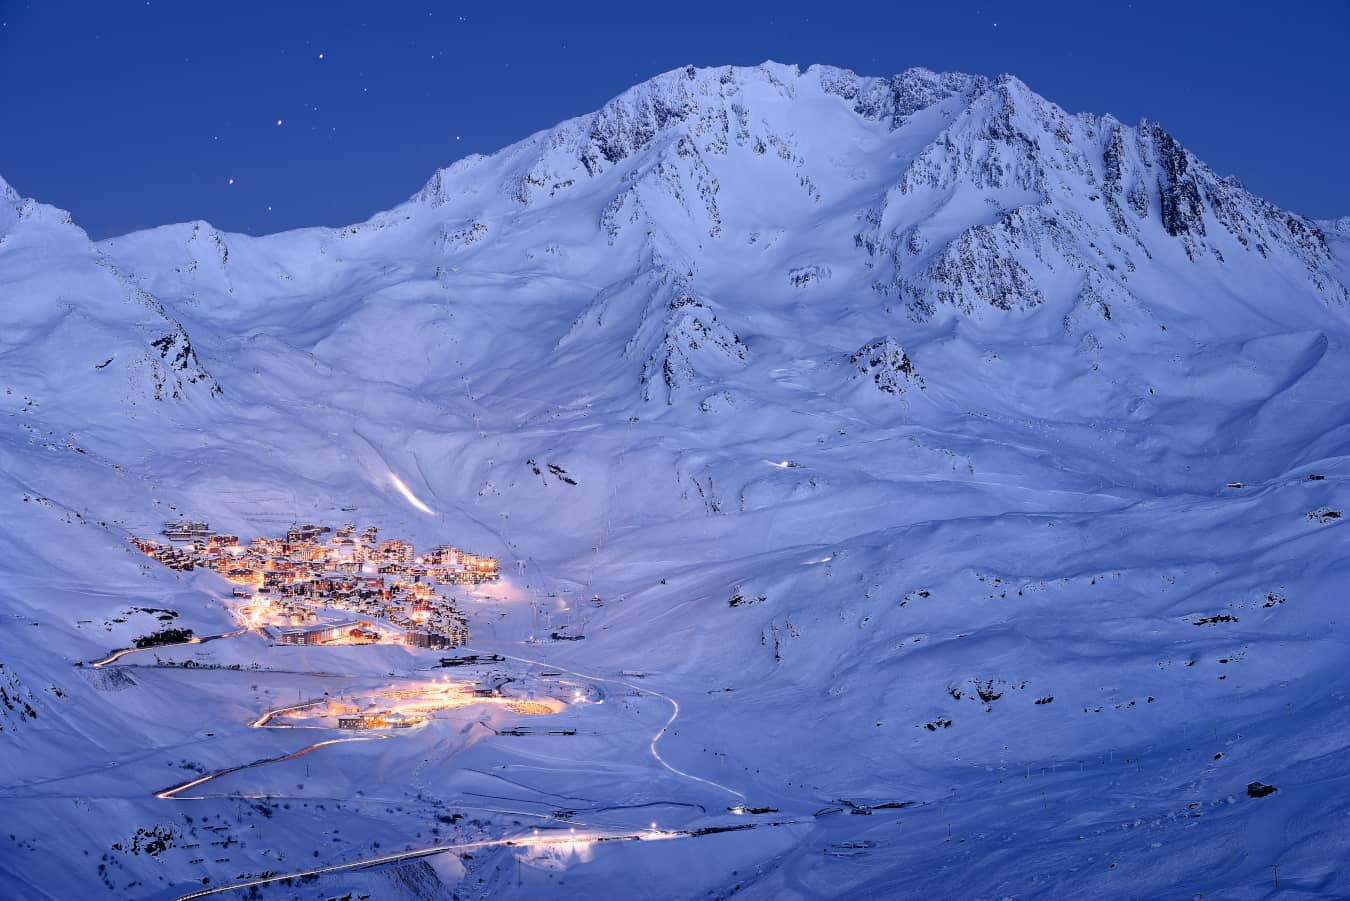 Val Thorens, located in Les 3 Vallées, at night with the piste groomers